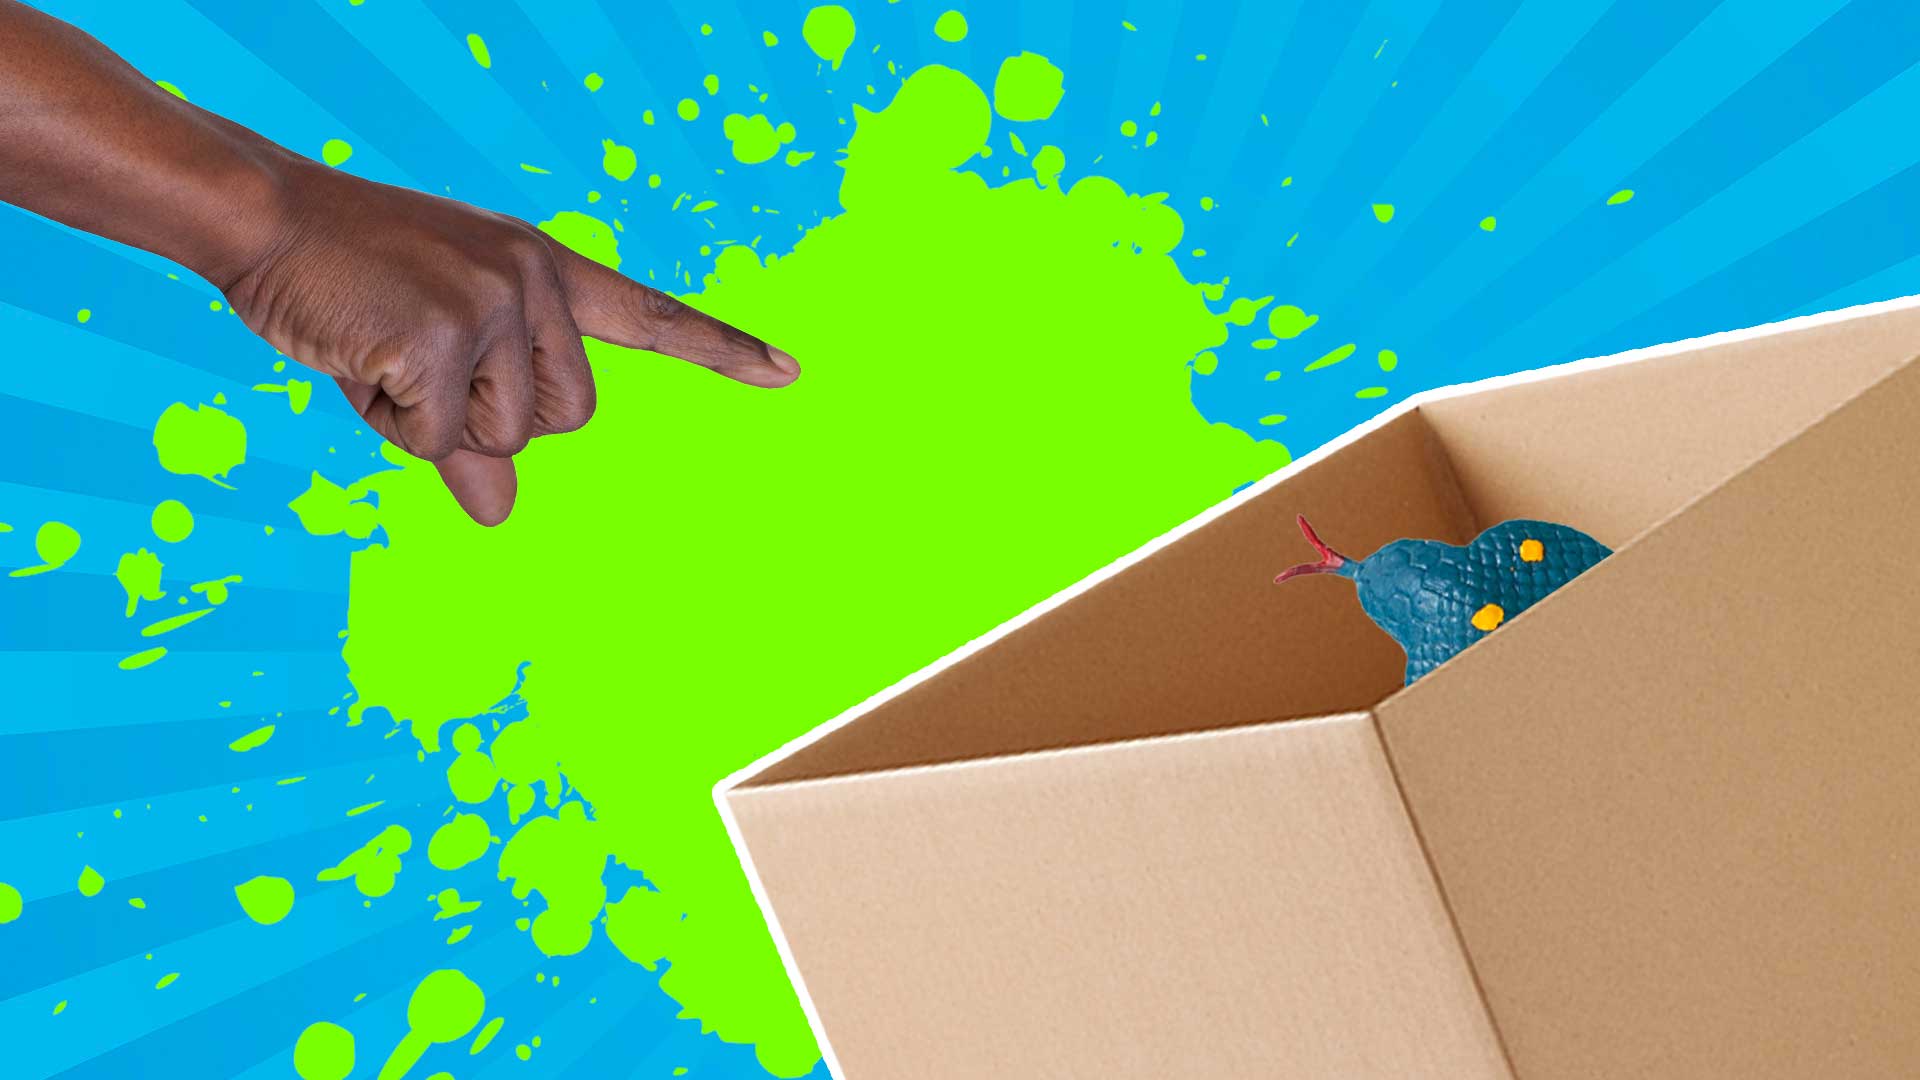 A hand pointing at a rubber snake in a cardboard box